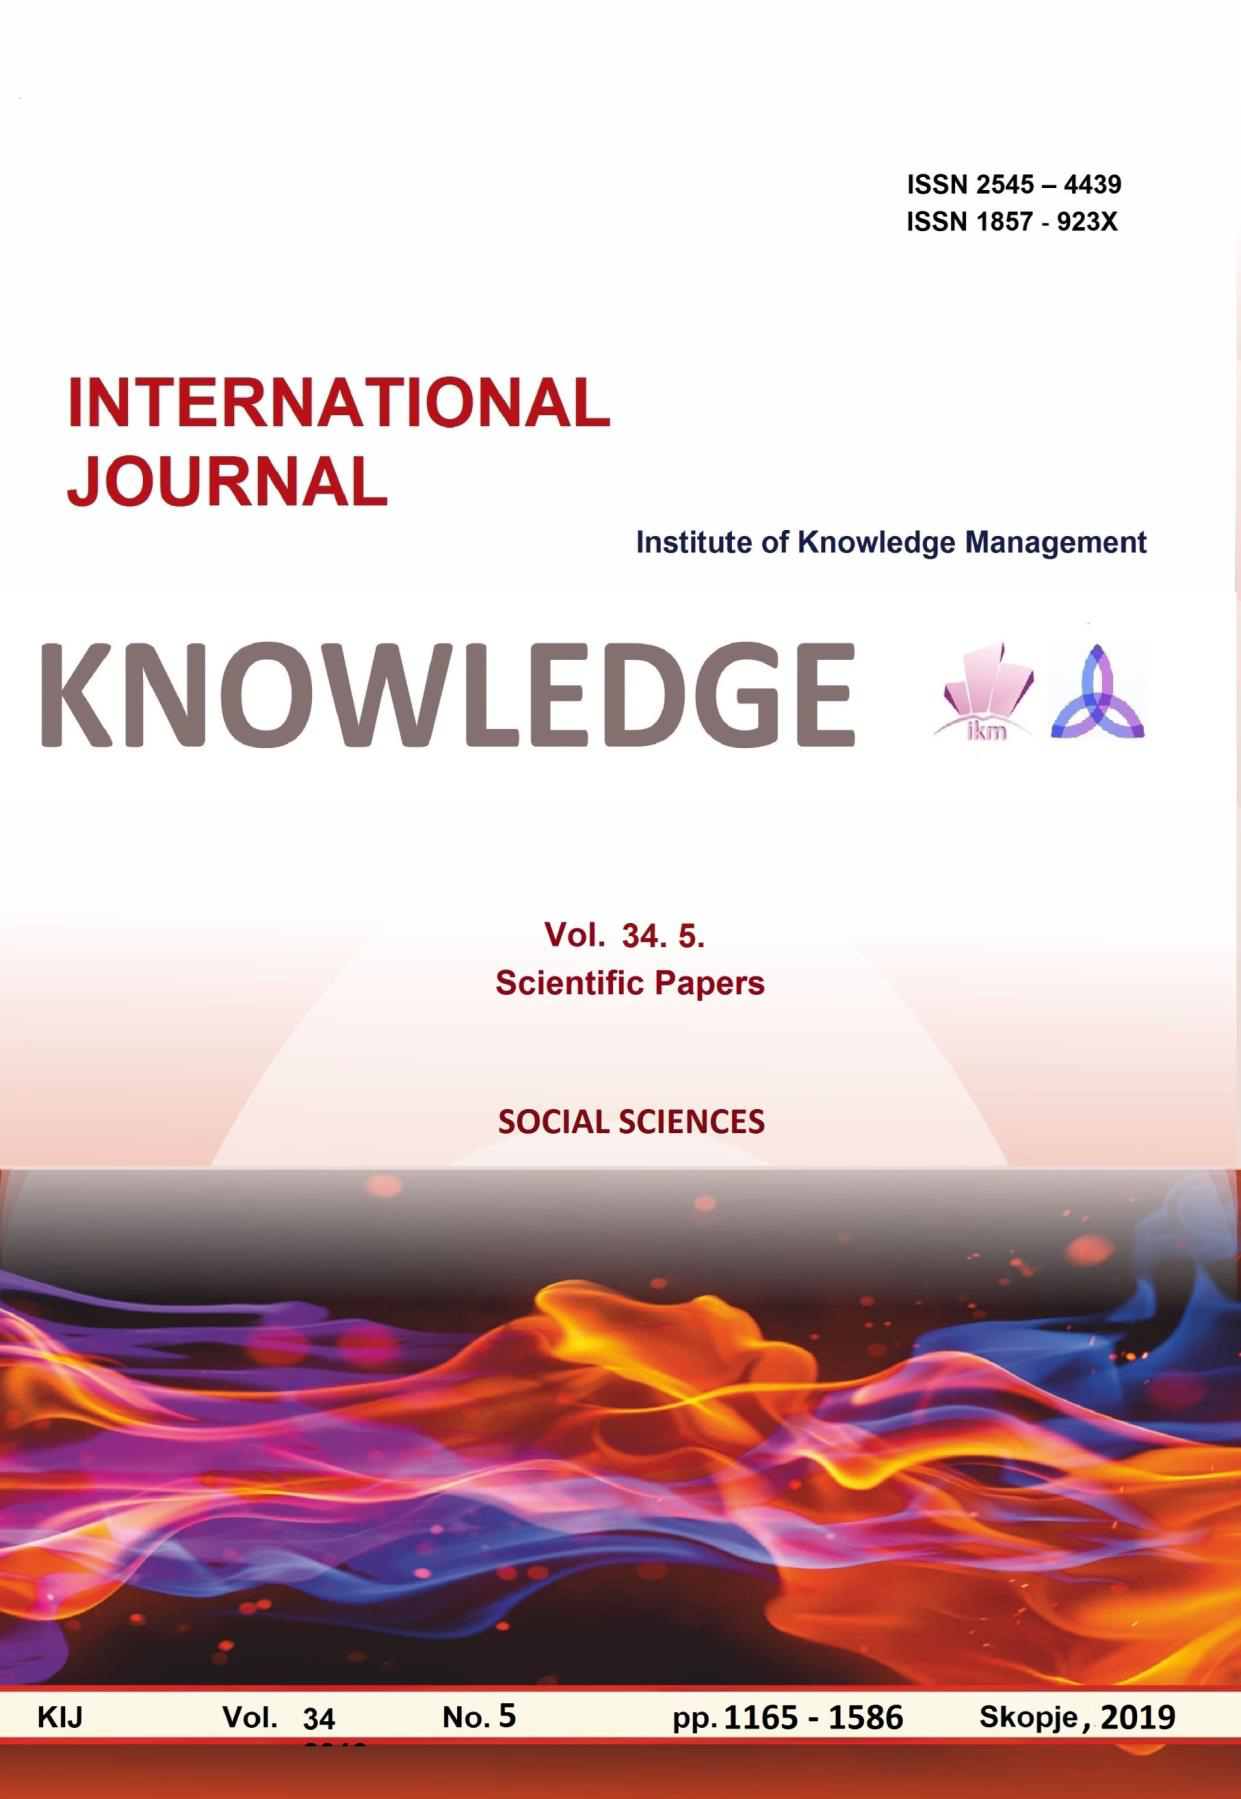 					View Vol. 34 No. 5 (2019): Knowledge without borders
				